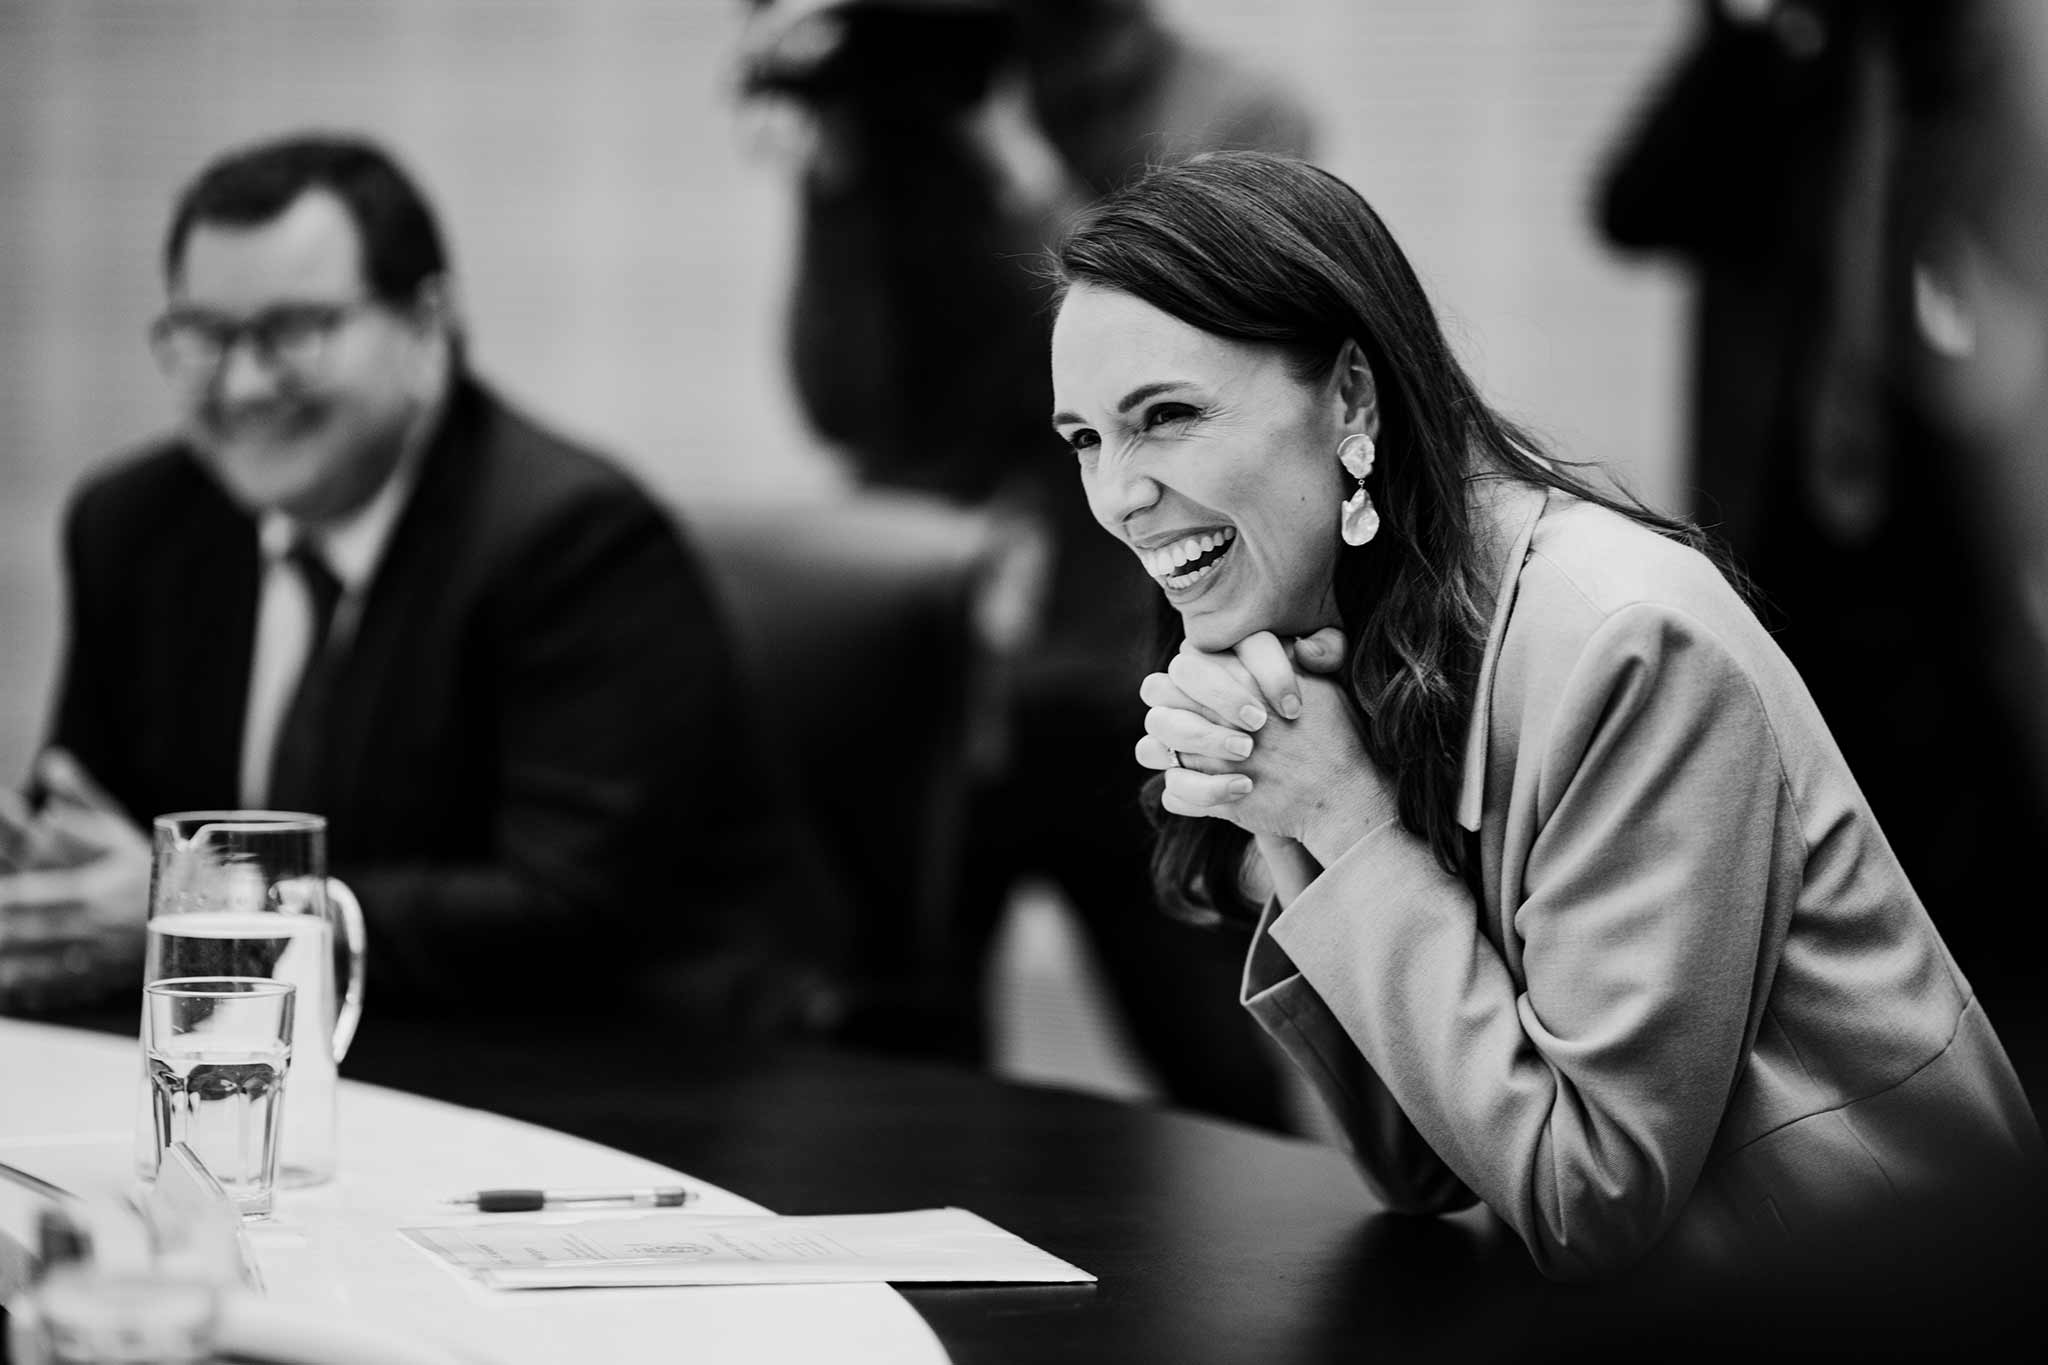 Black and white photo of Jacinda Ardern smiling and leaning on a table, with Grant Robertson smiling in the background.